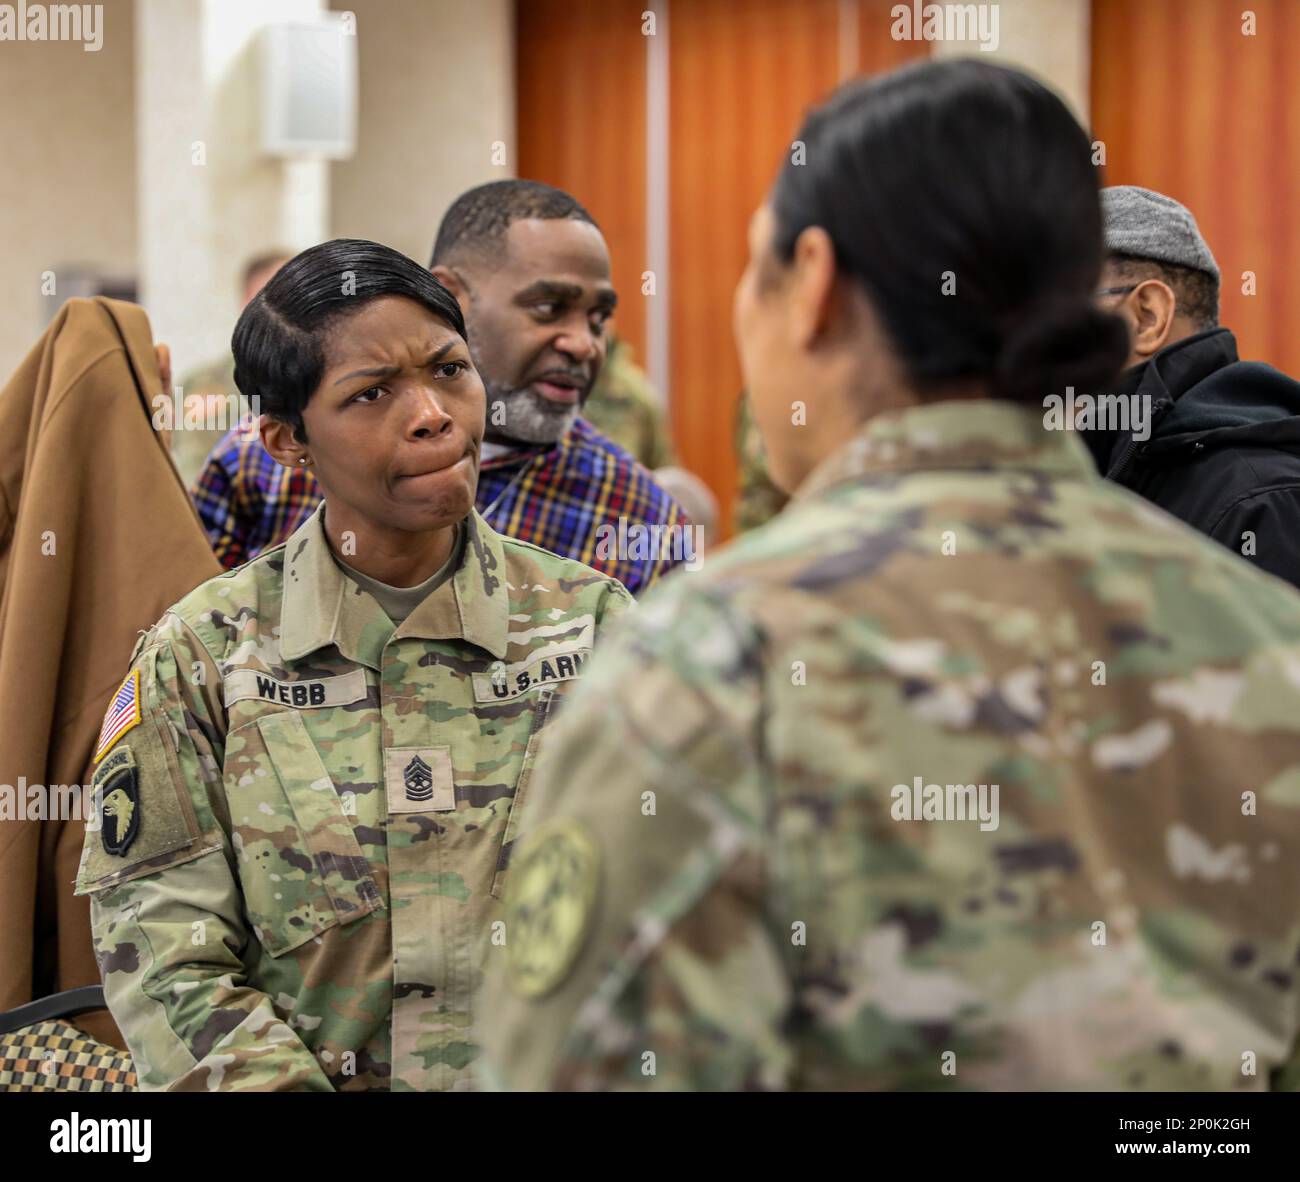 Sgt. Maj. Nonya Webb speaks with Capt. Devan Icsman following Dr. Martin Luther King, Jr. prayer breakfast on Caserma Ederle. The event was an opportunity for Soldiers and civilians to reflect on past injustices King fought during the civil rights movement and highlight diversity in today's Army. Stock Photo